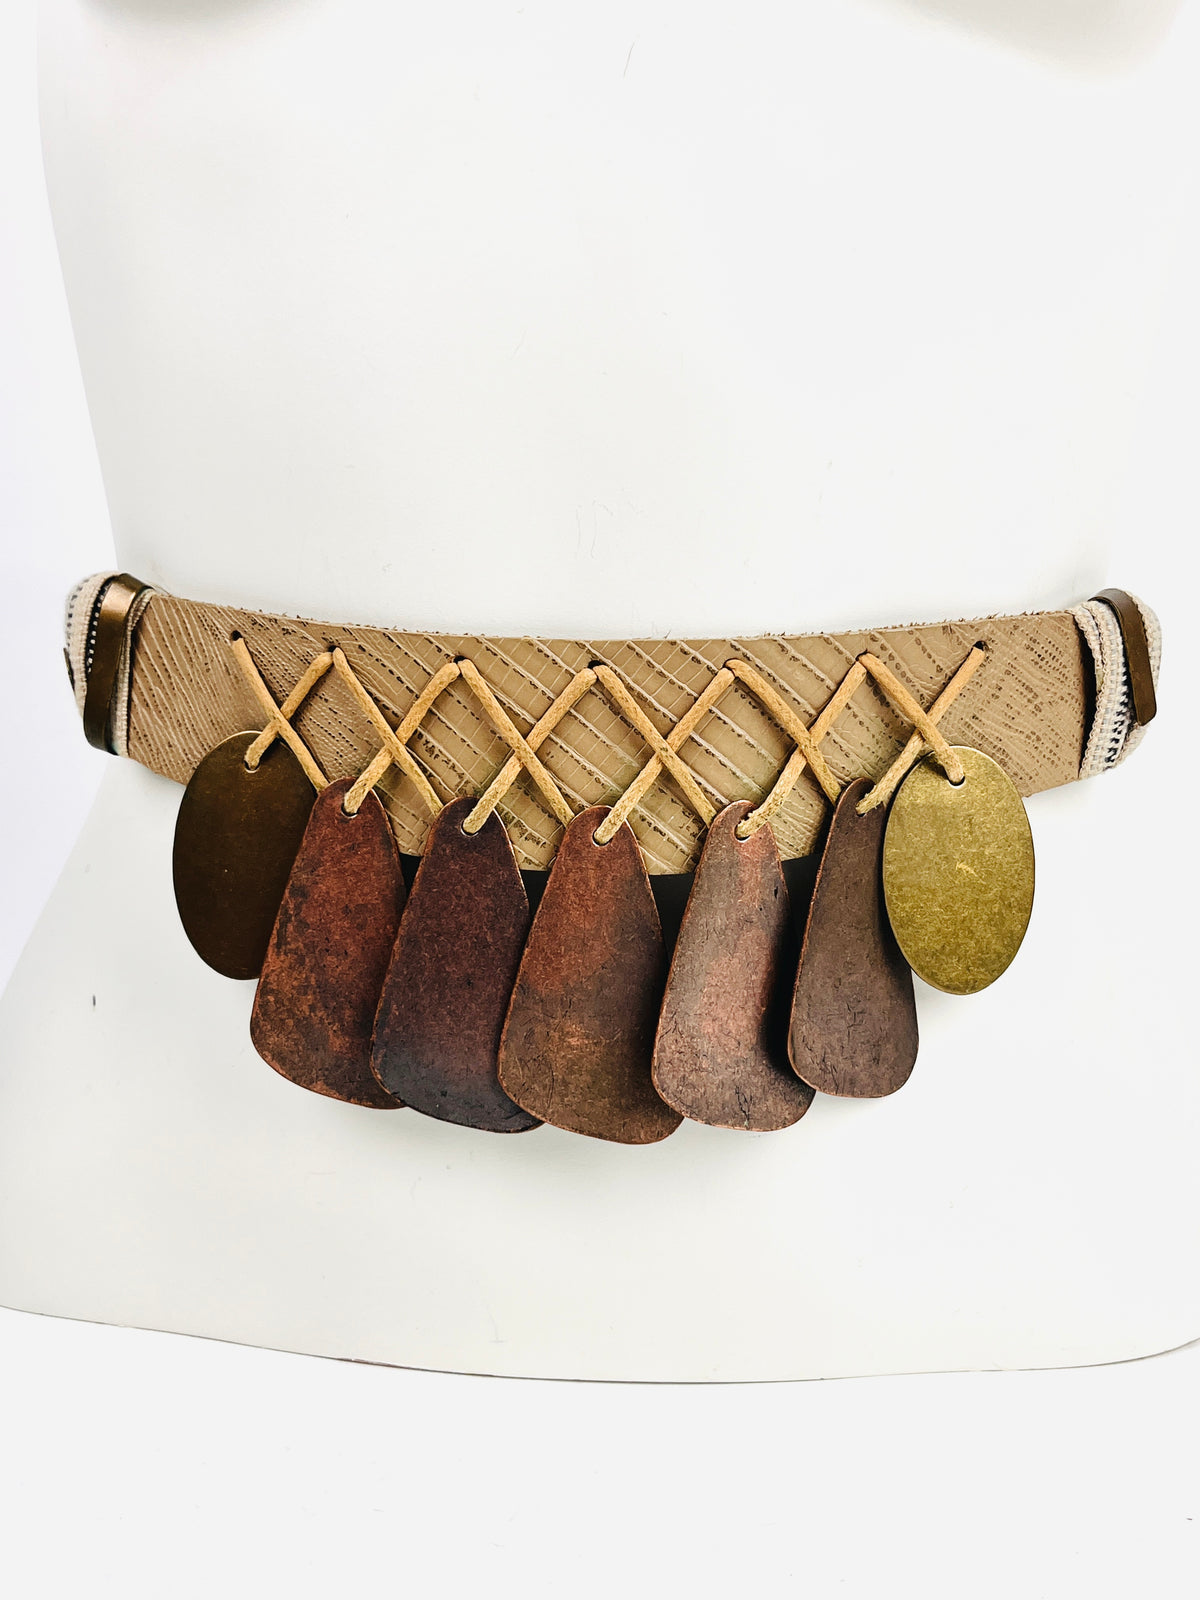 Vintage Leather, Metal, and Cord Belt